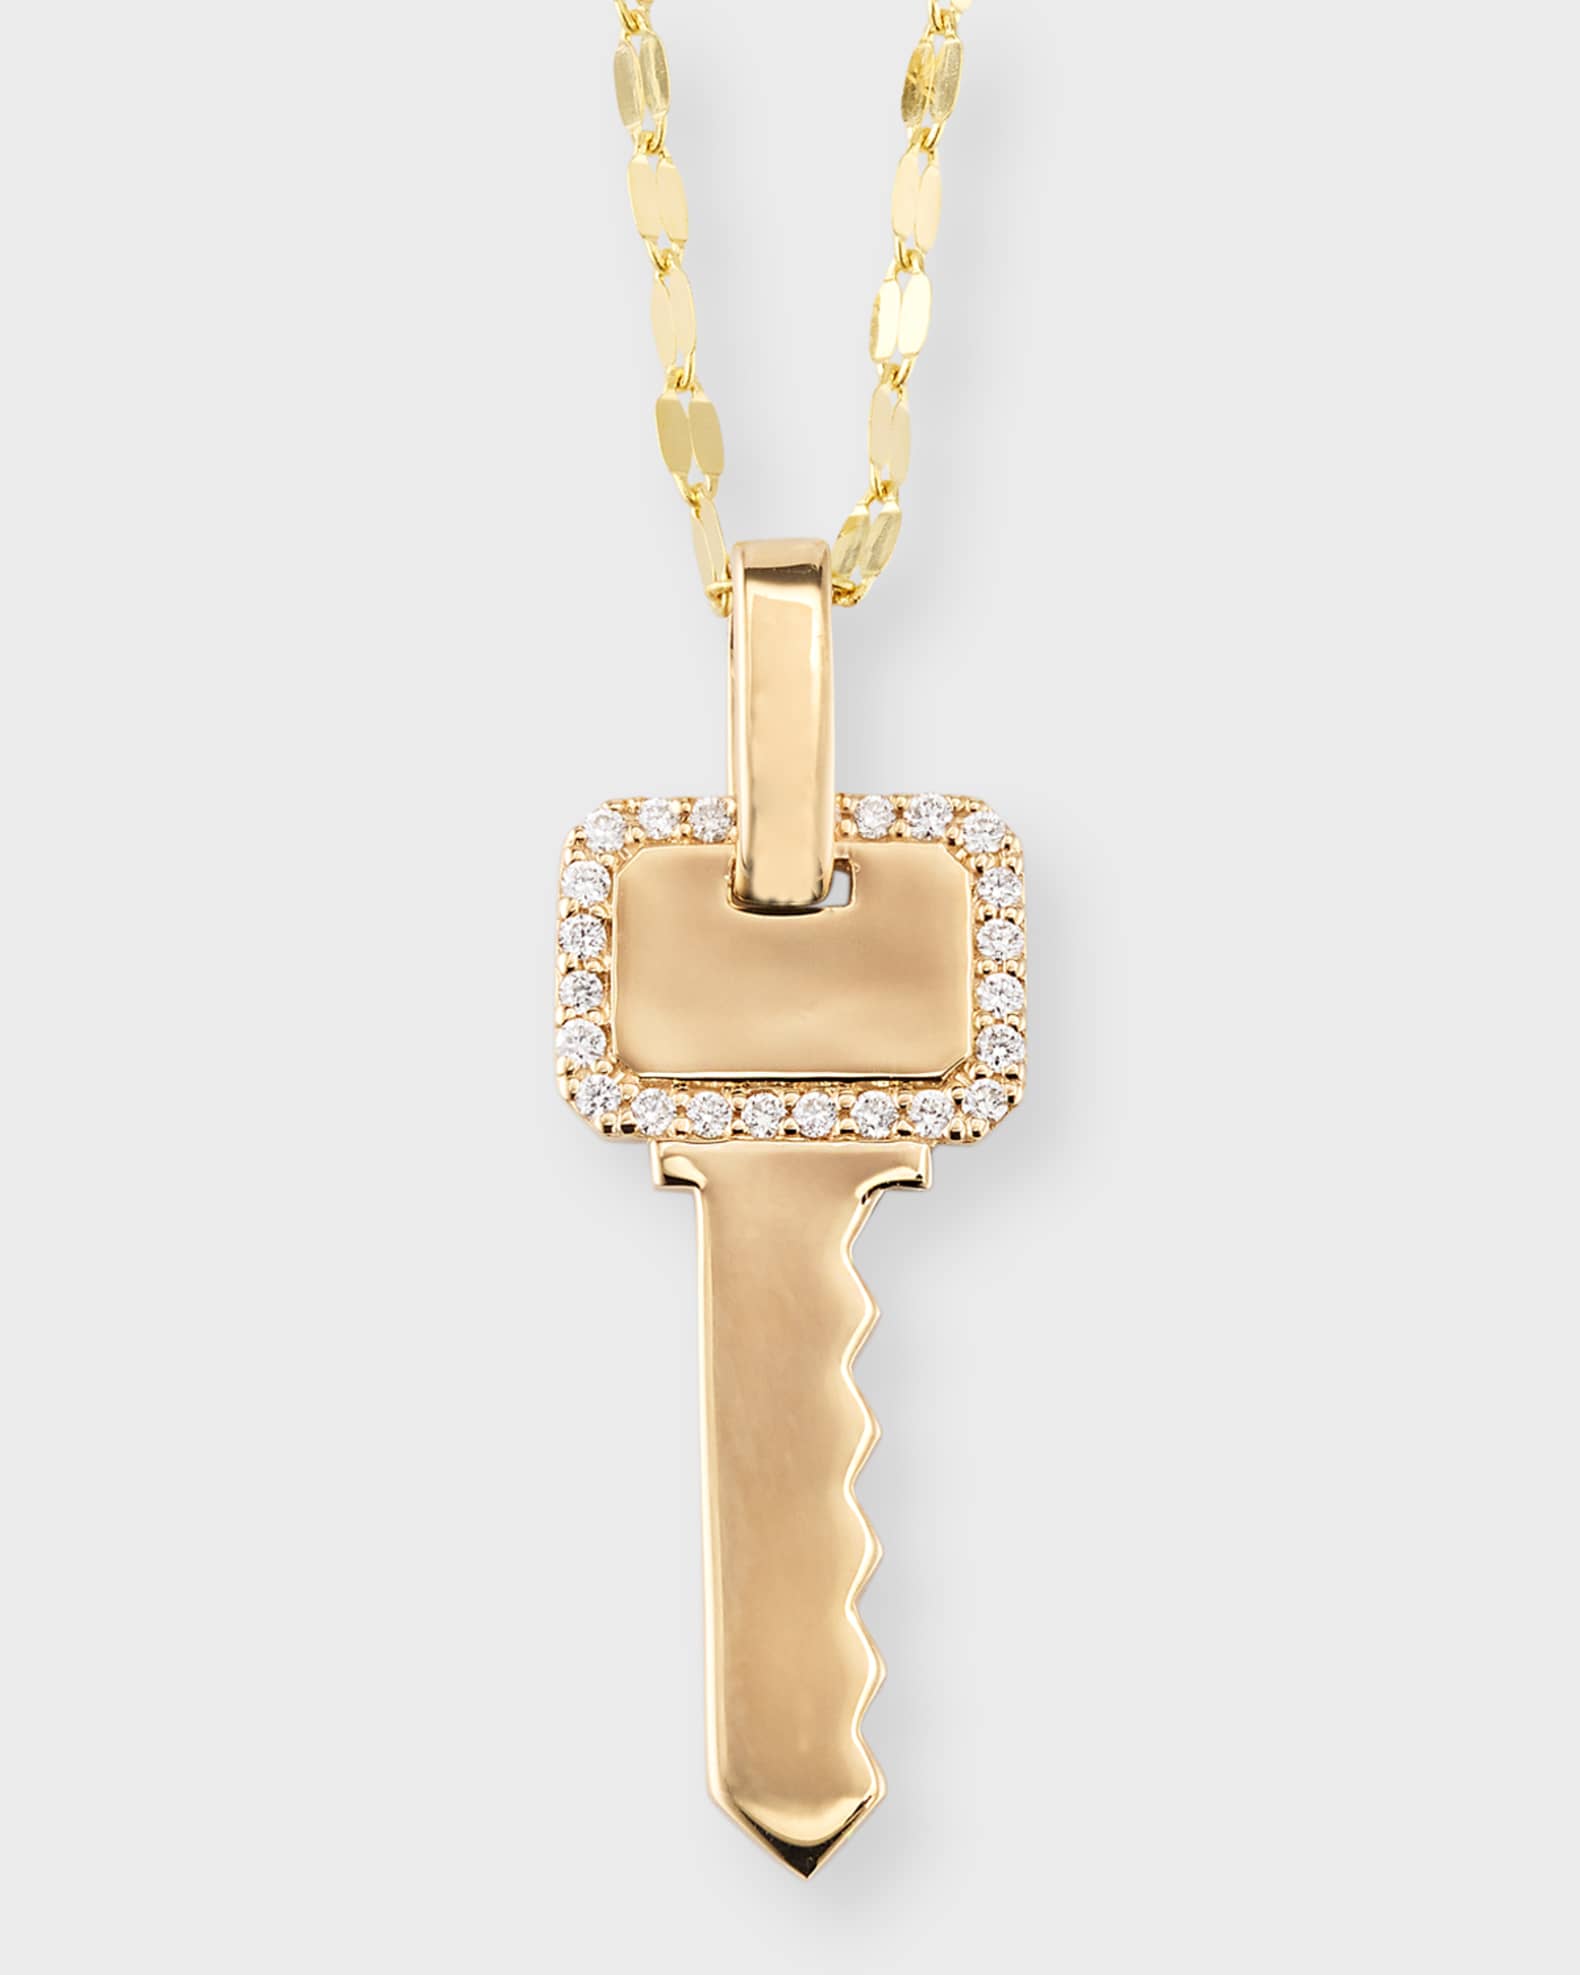  Jewelry Affairs 14k Yellow Real Gold Lock And Key